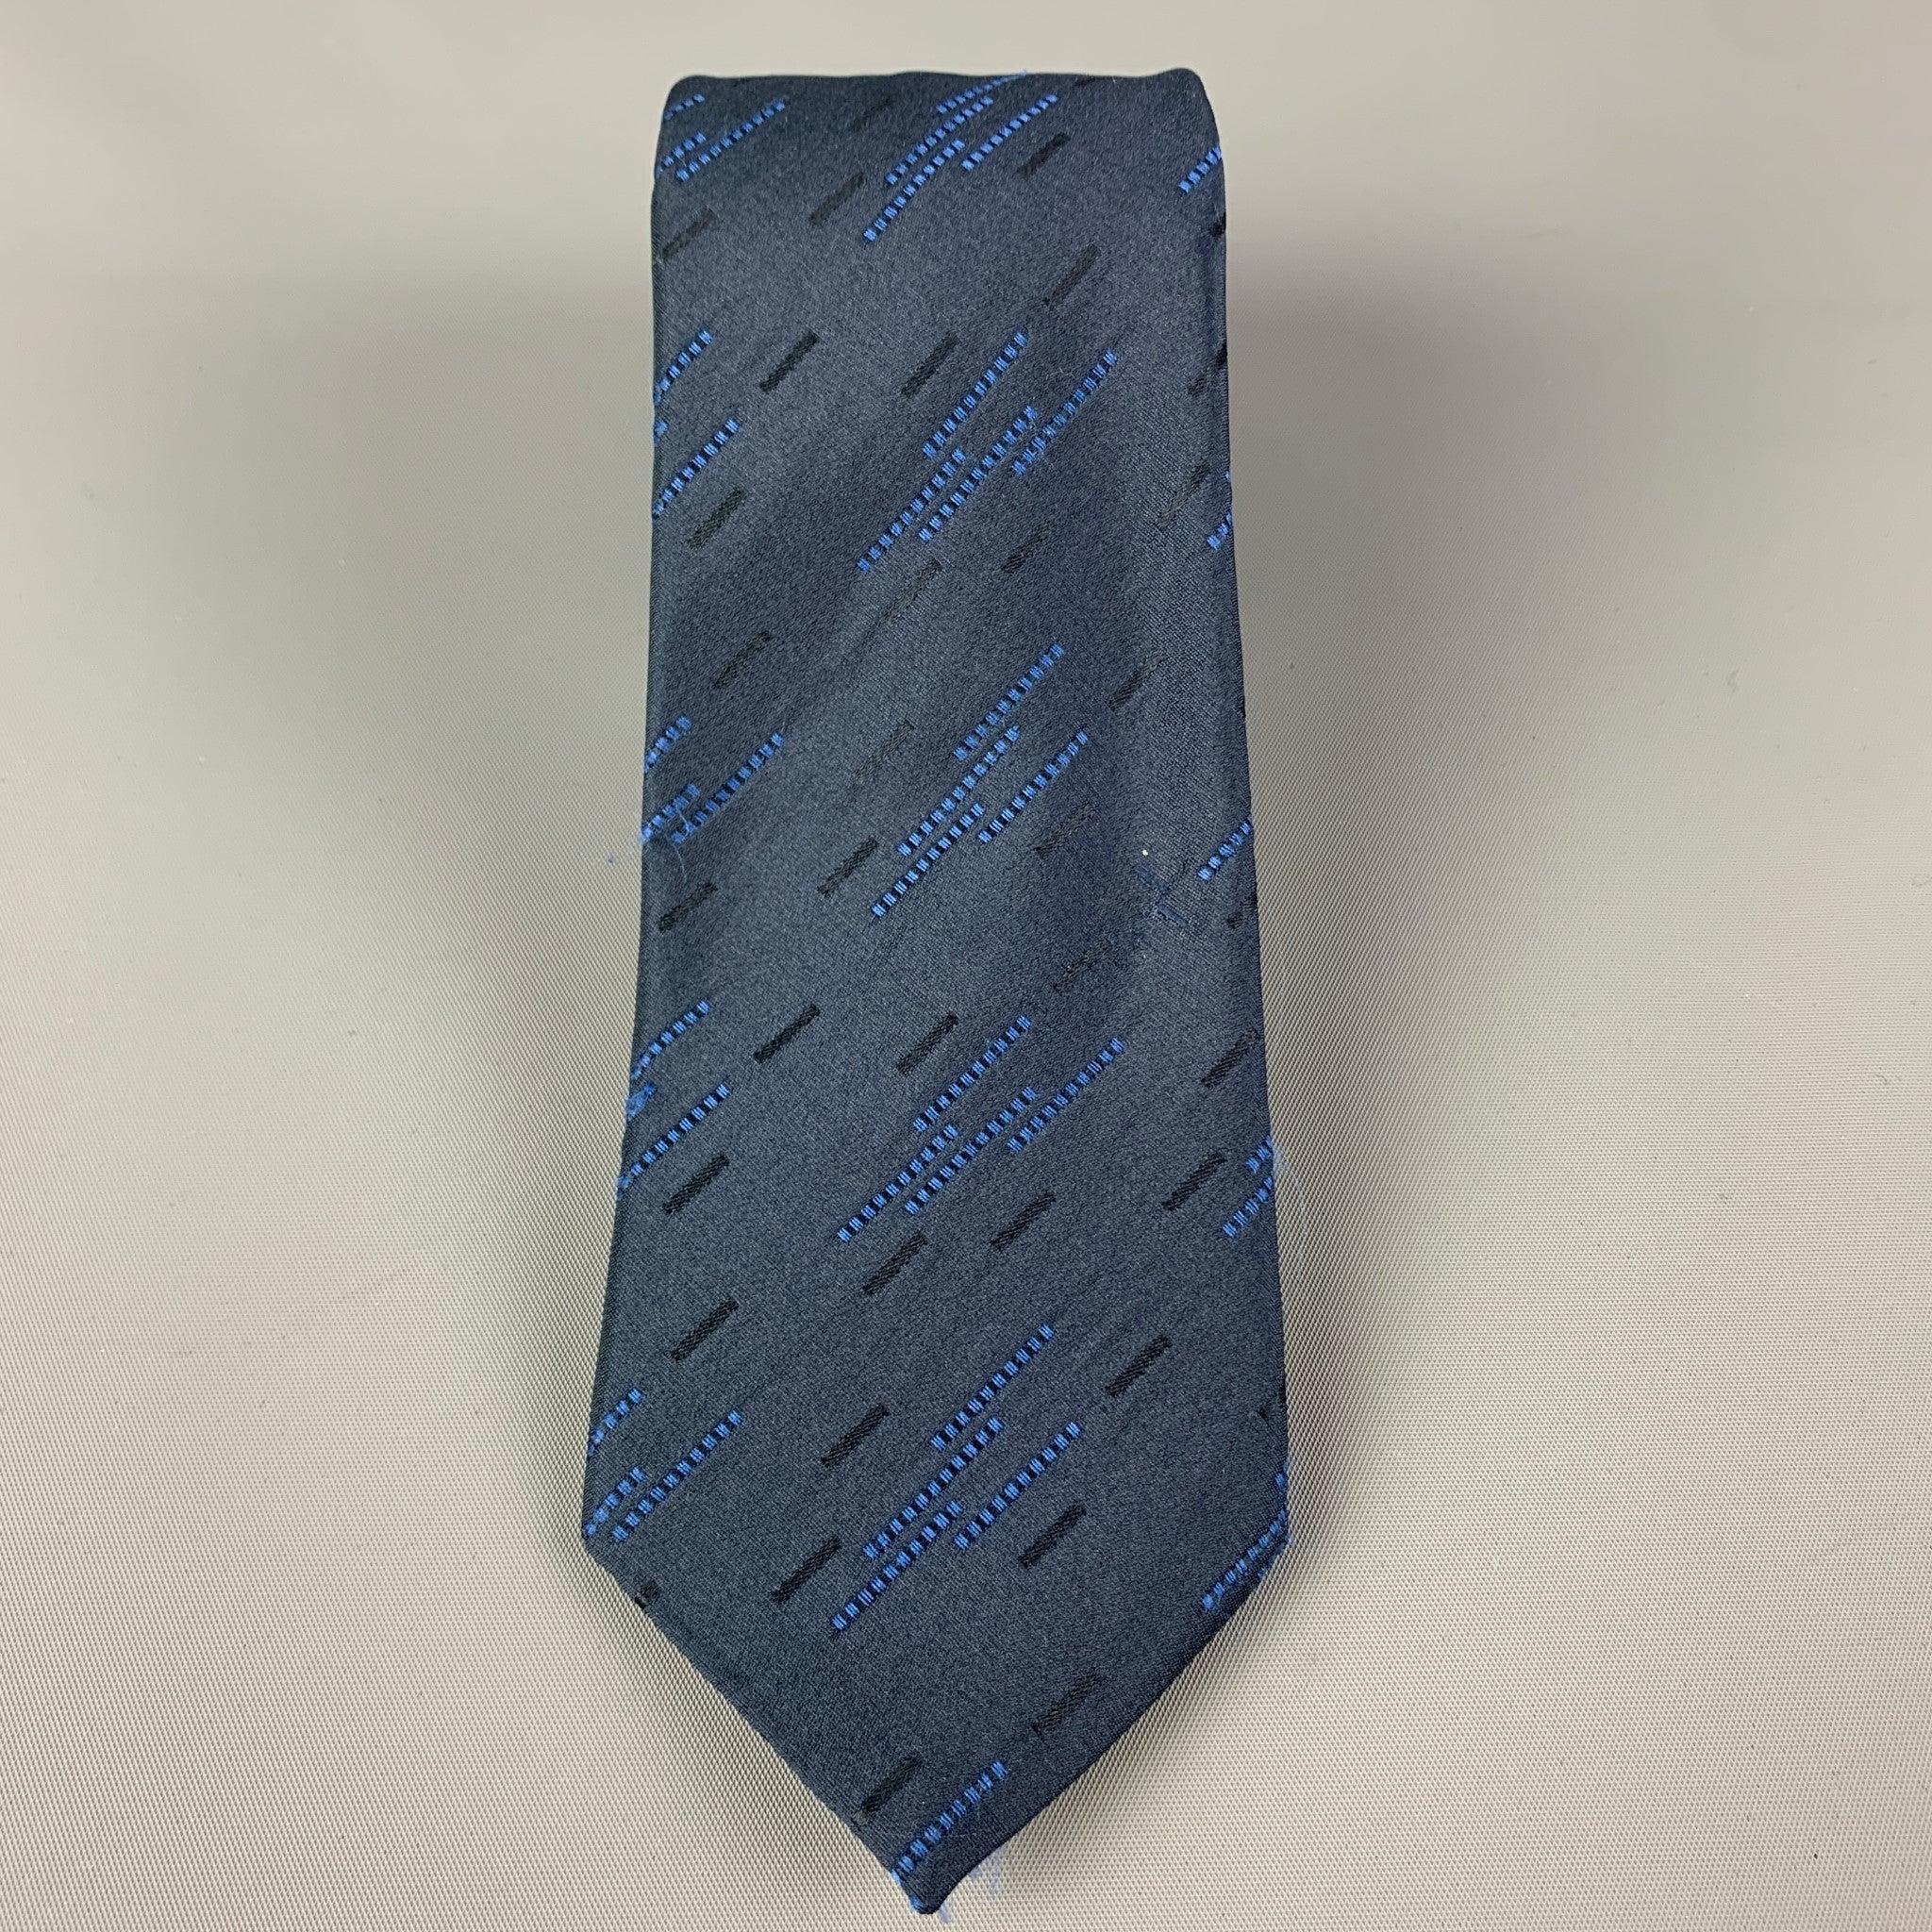 ROMEO GIGLI
 necktie comes in a navy & blue silk with a all over textured print. Made in Italy. Very Good Pre-Owned Condition. 
 

 Measurements: 
  Width: 3 inches Length: 60 inches 
  
  
  
 Sui Generis Reference: 119900
 Category: Tie
 More